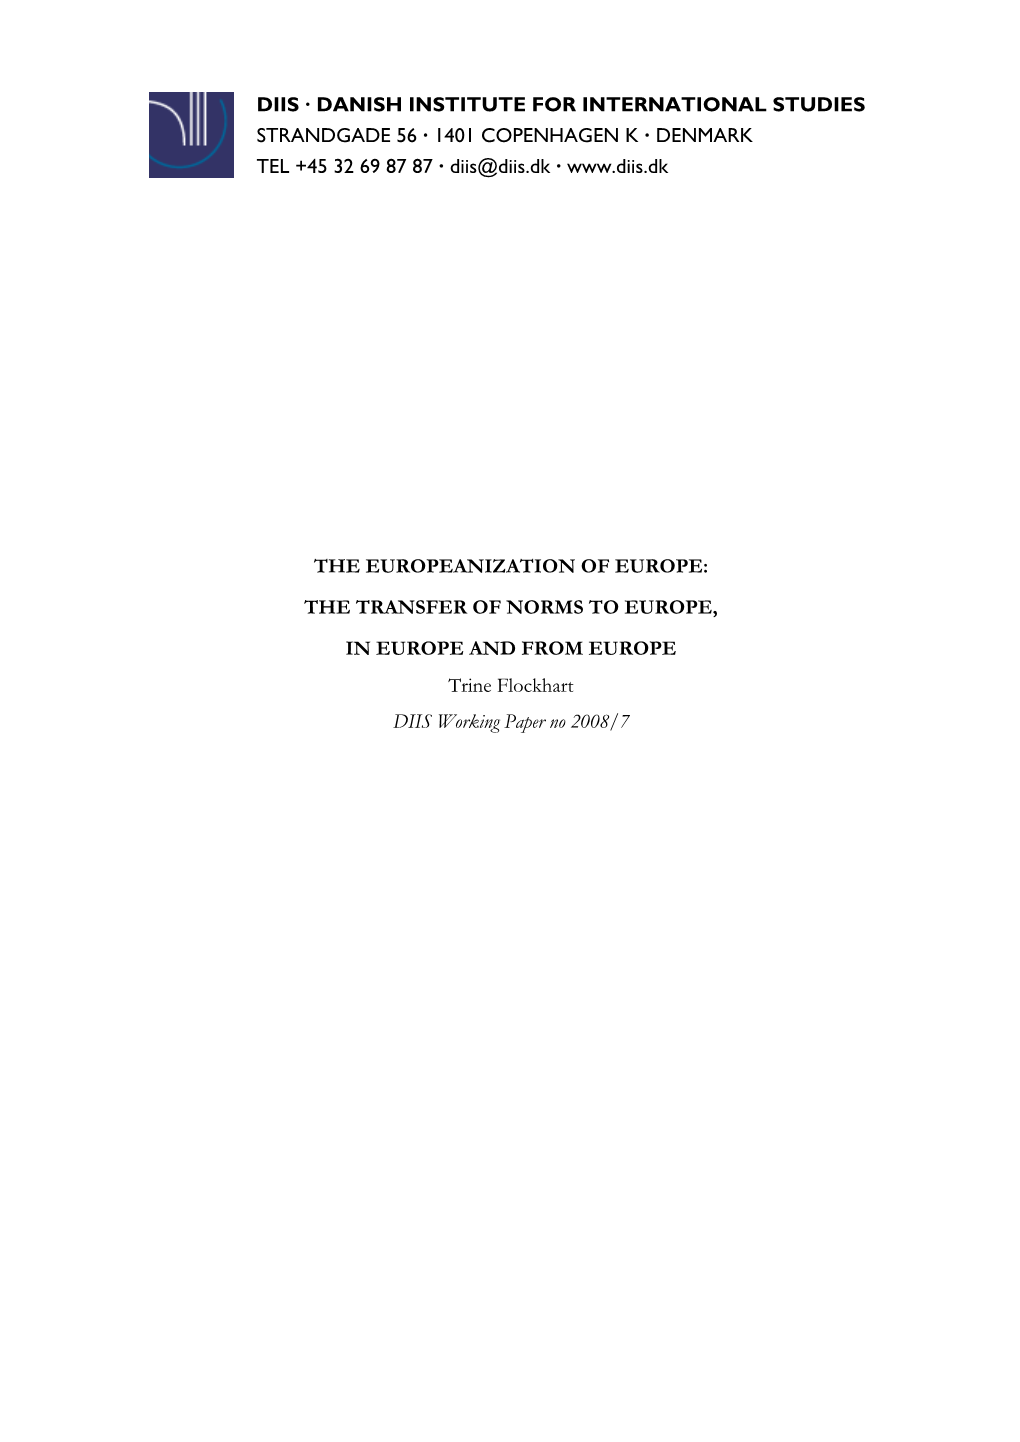 THE EUROPEANIZATION of EUROPE: the TRANSFER of NORMS to EUROPE, in EUROPE and from EUROPE Trine Flockhart DIIS Working Paper No 2008/7